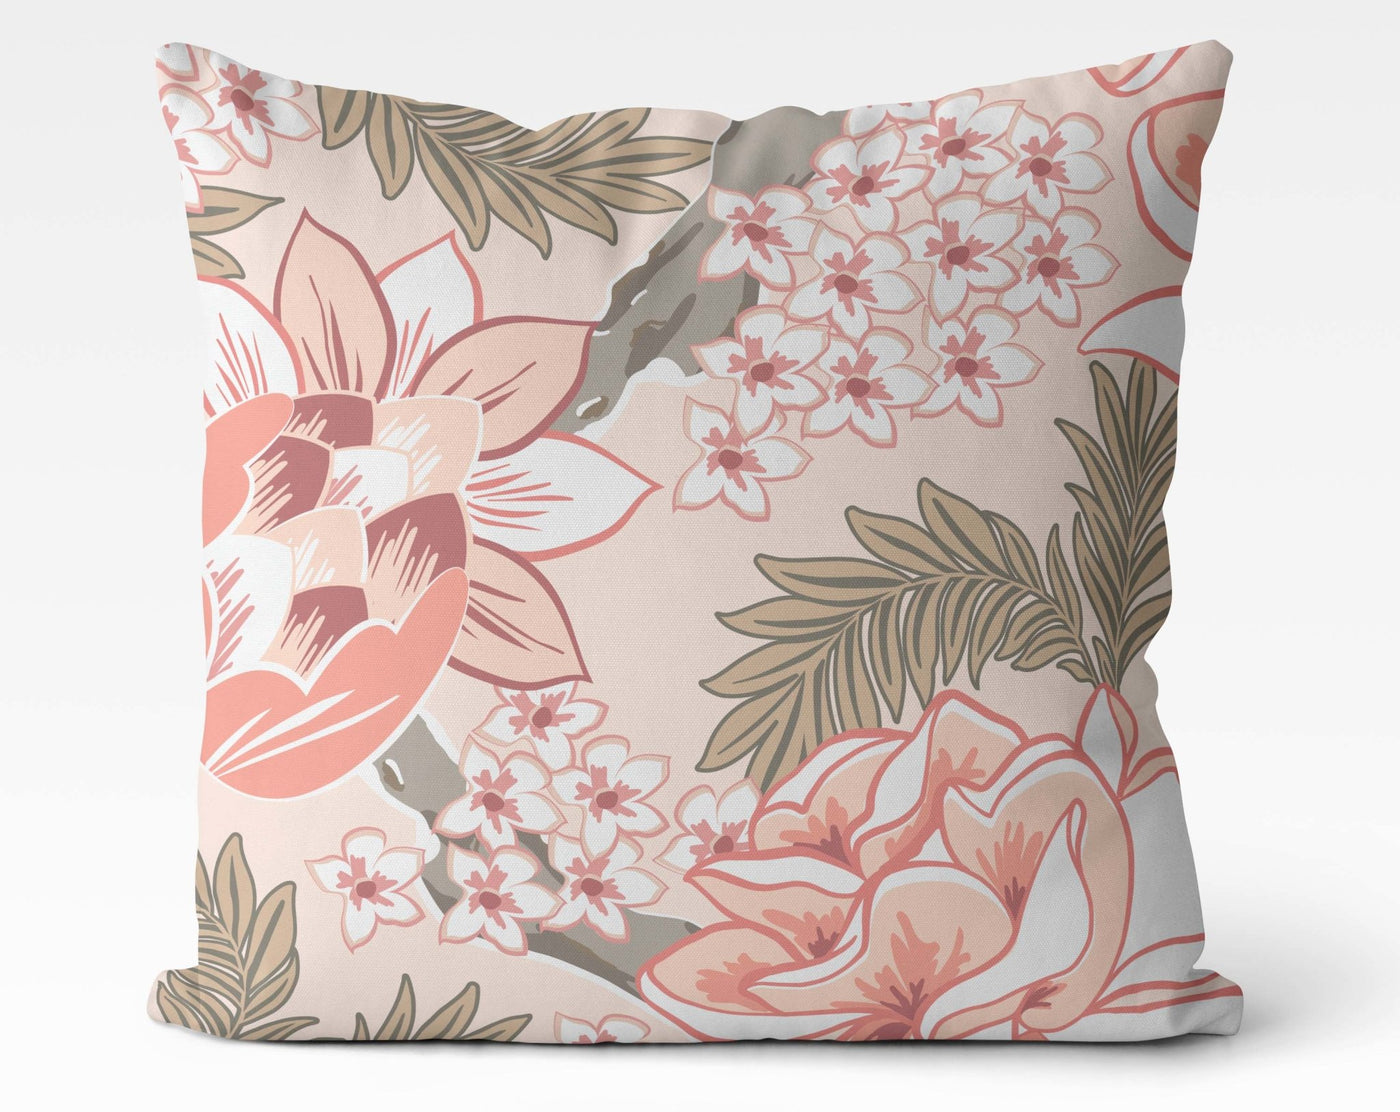 Exclusive Pink Thibaut Honshu Robin's Egg Inspired Chinoiserie Pillow Throw Cover with Insert - Cush Potato Pillows